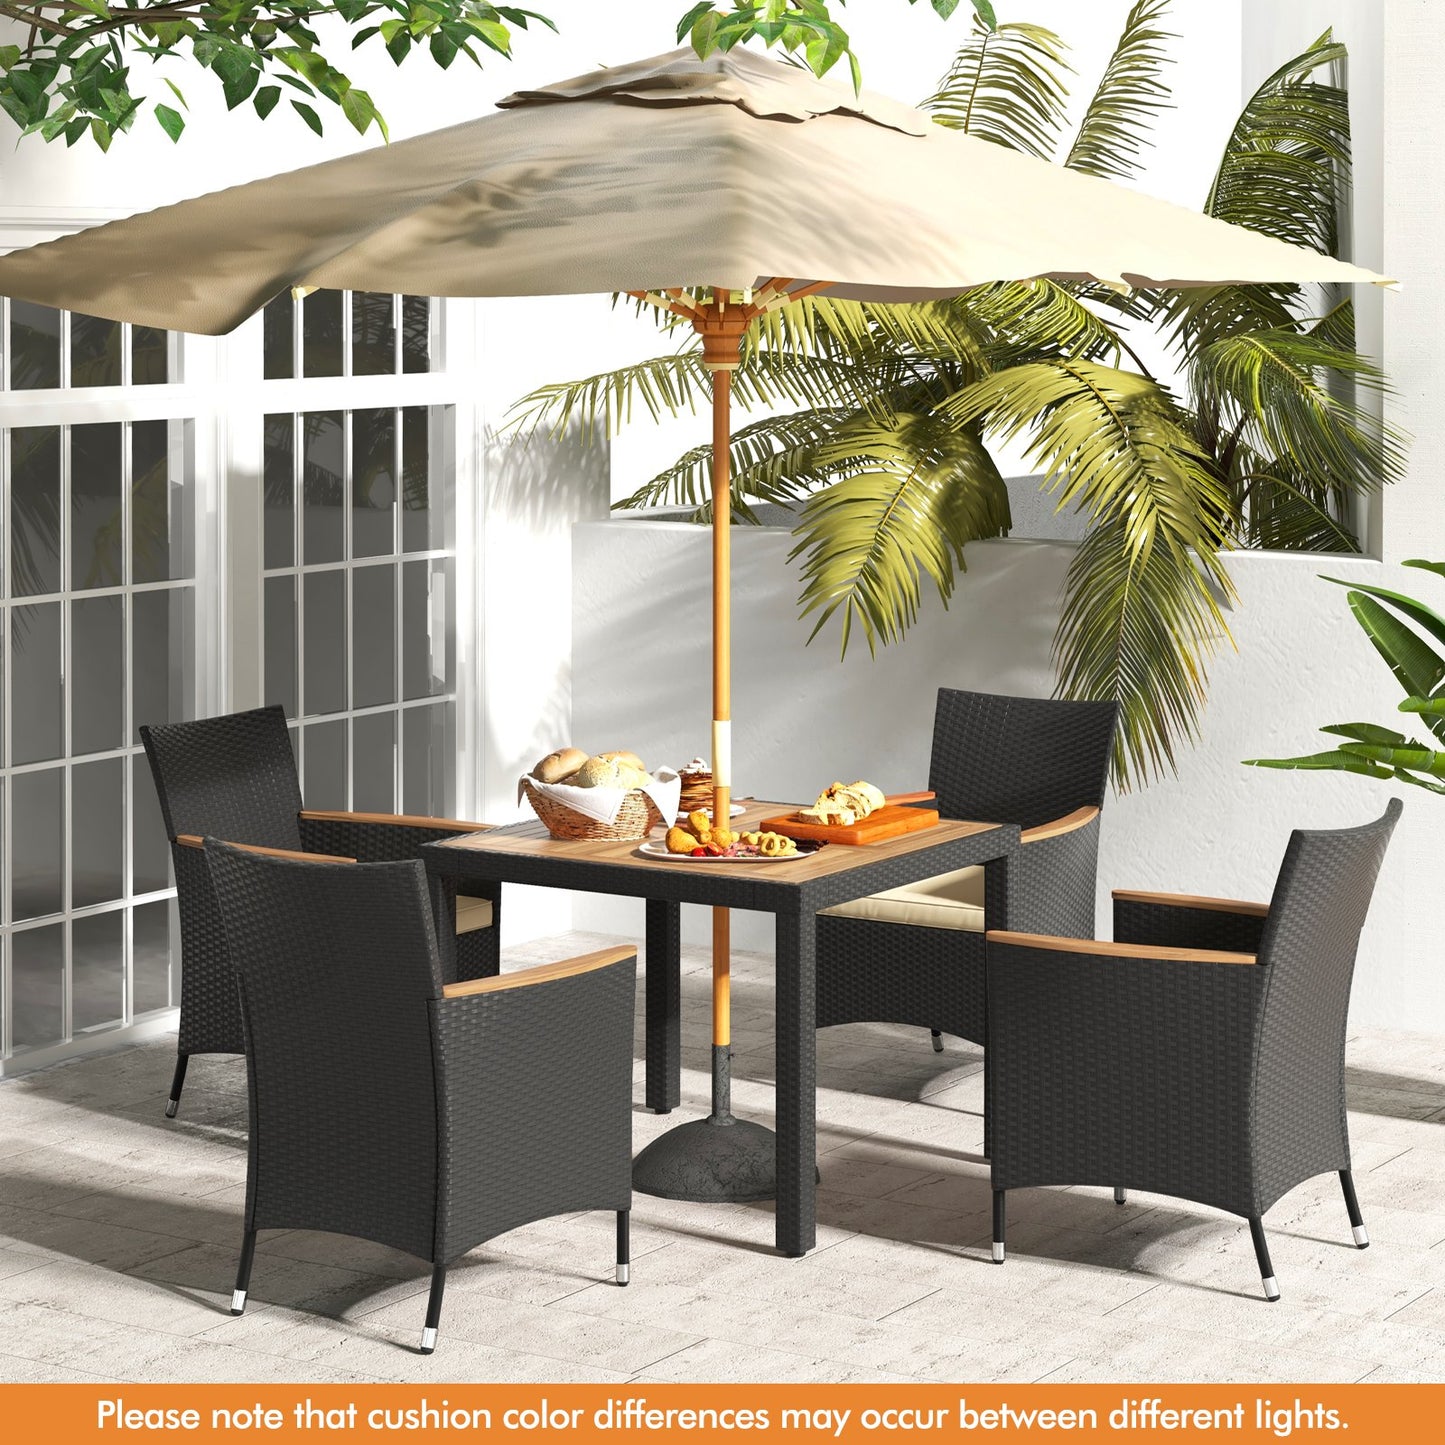 5 Pieces Patio Dining Table Set for 4 with Umbrella Hole, Black